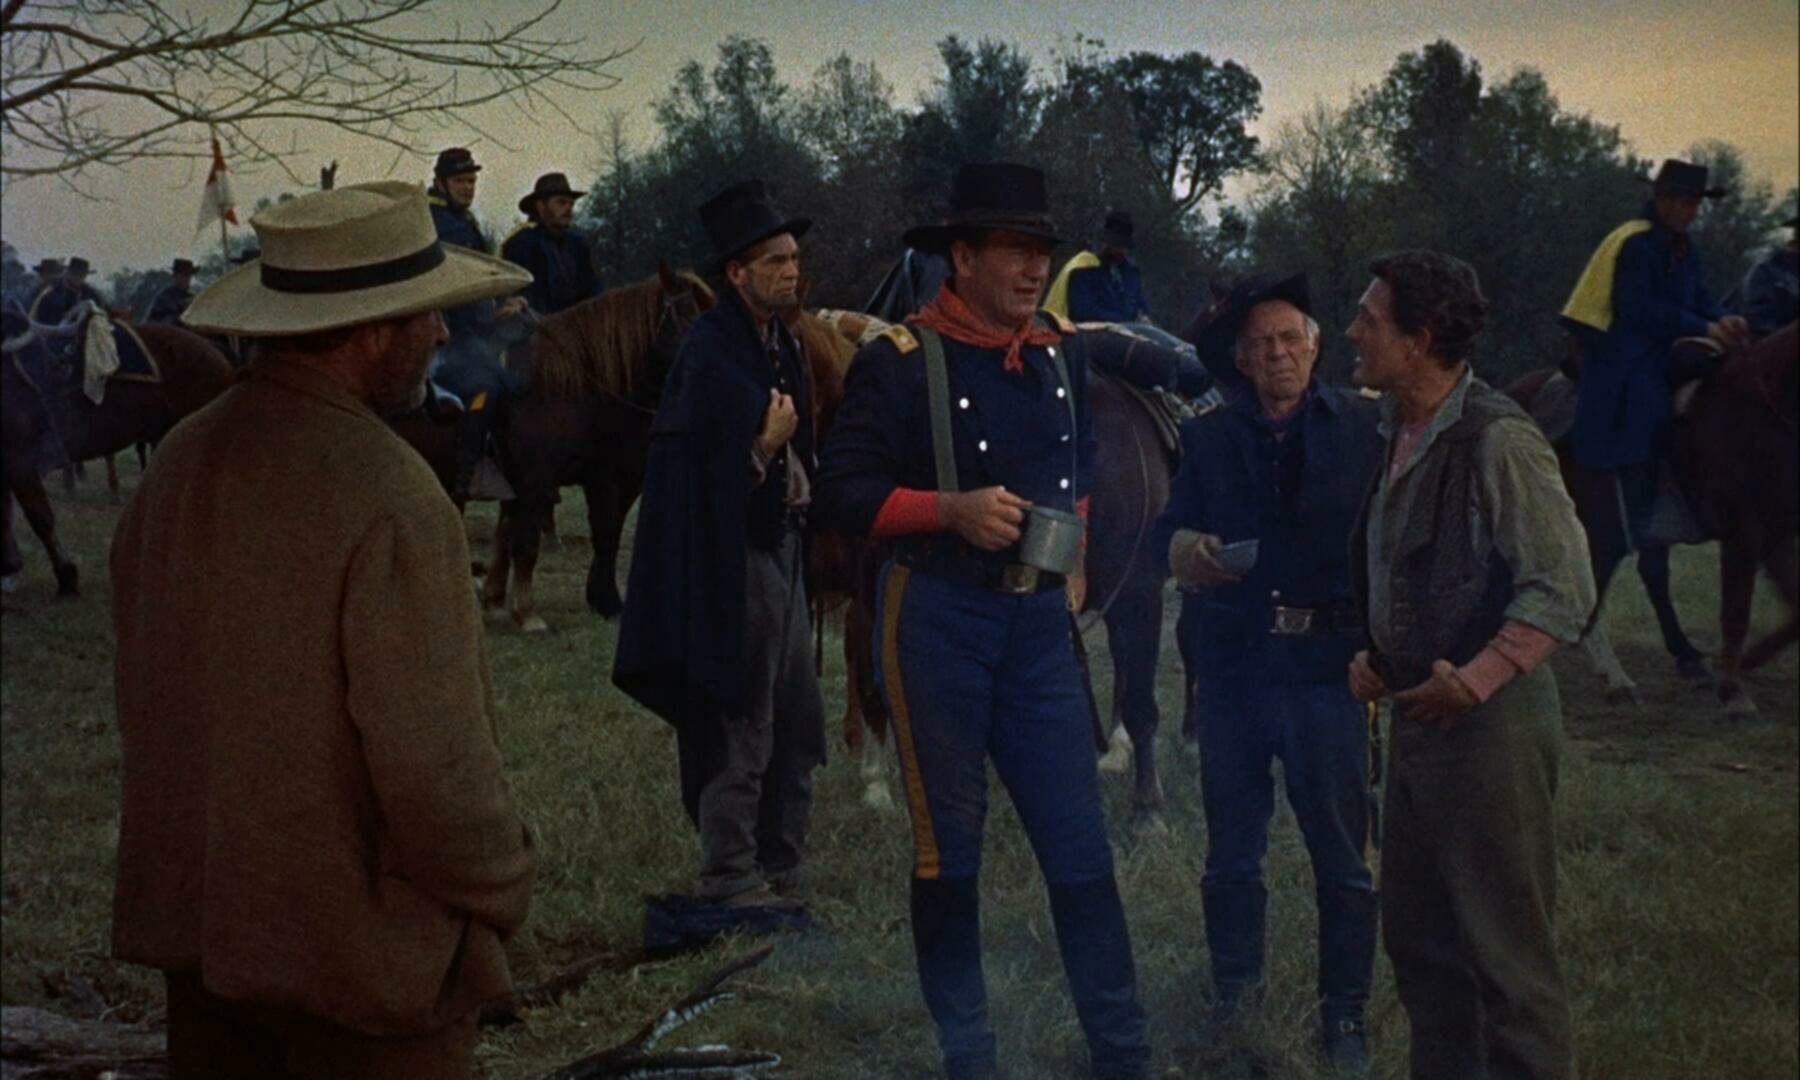 The Horse Soldiers 1959 1080p AMZN WEB DL DDP 2 0 H 264 PiRaTeS TGx